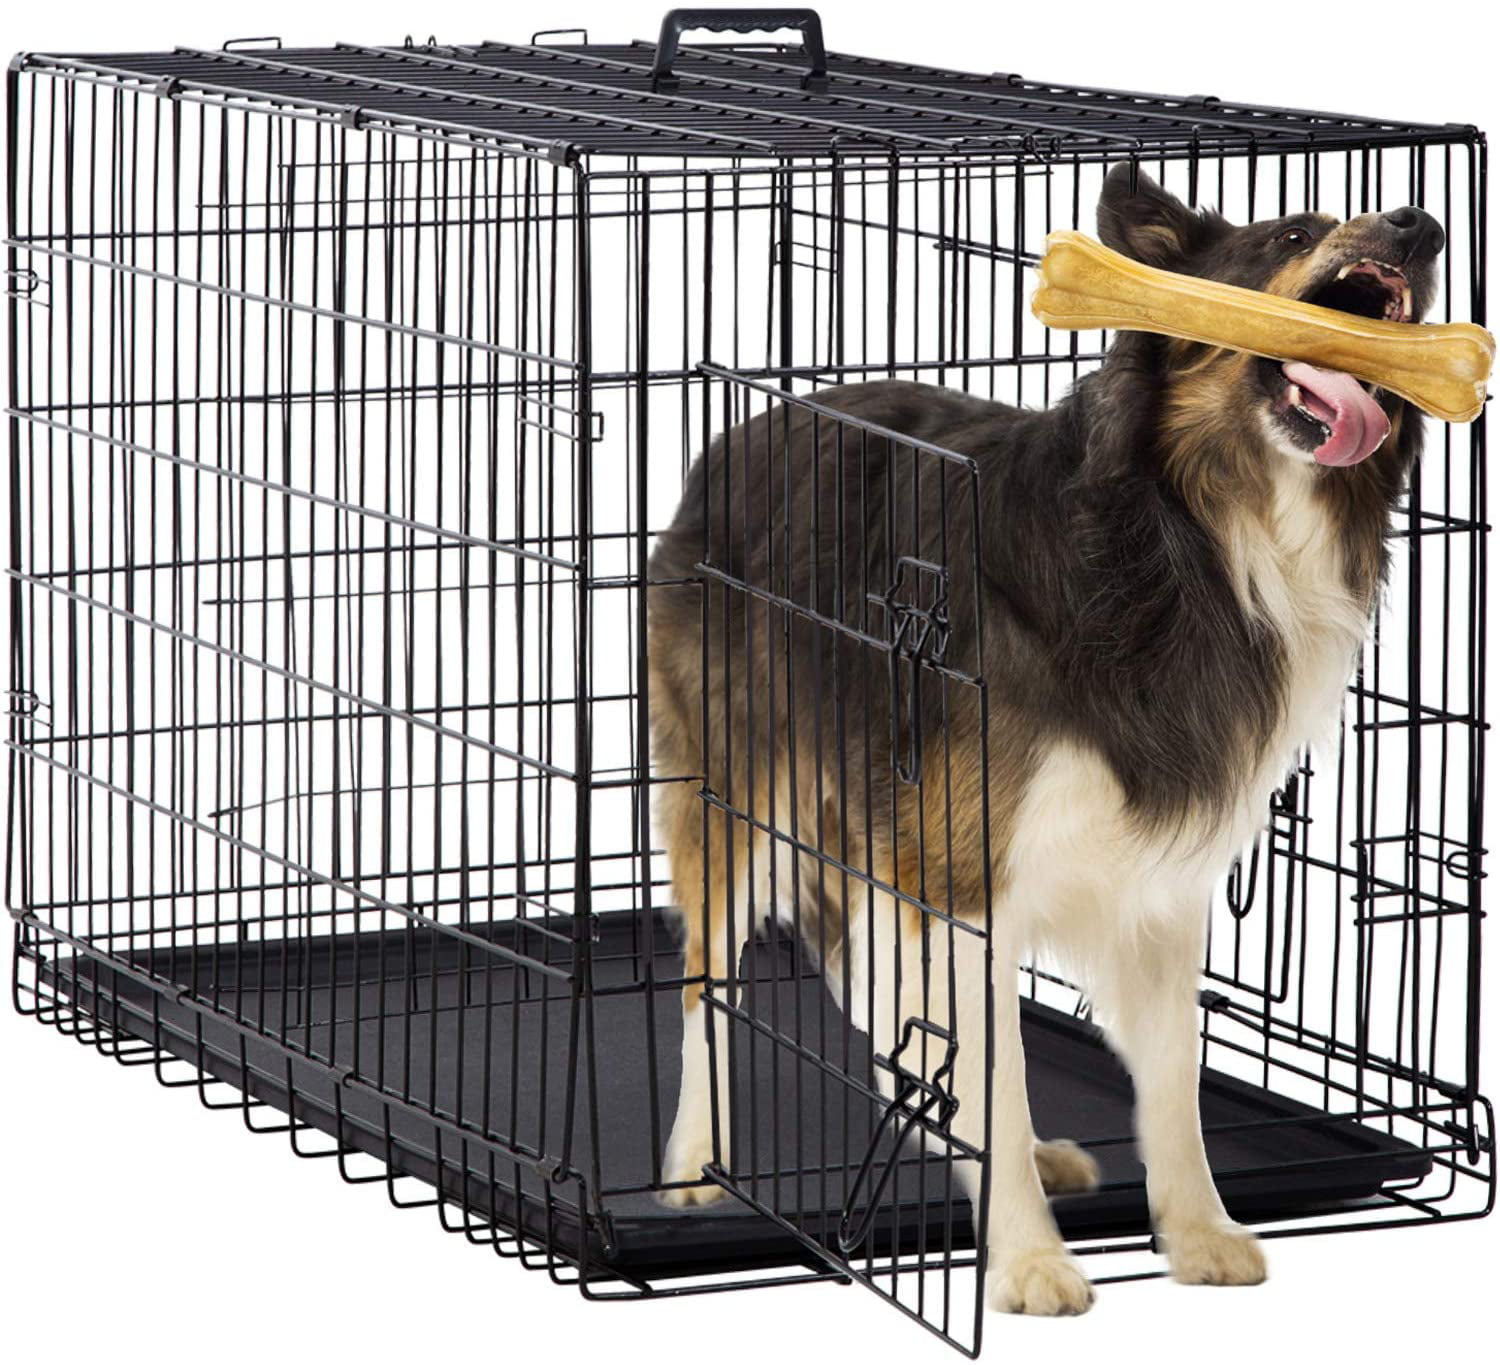 large-dog-crate-dog-cage-dog-kennel-metal-wiredouble-door-folding-pet